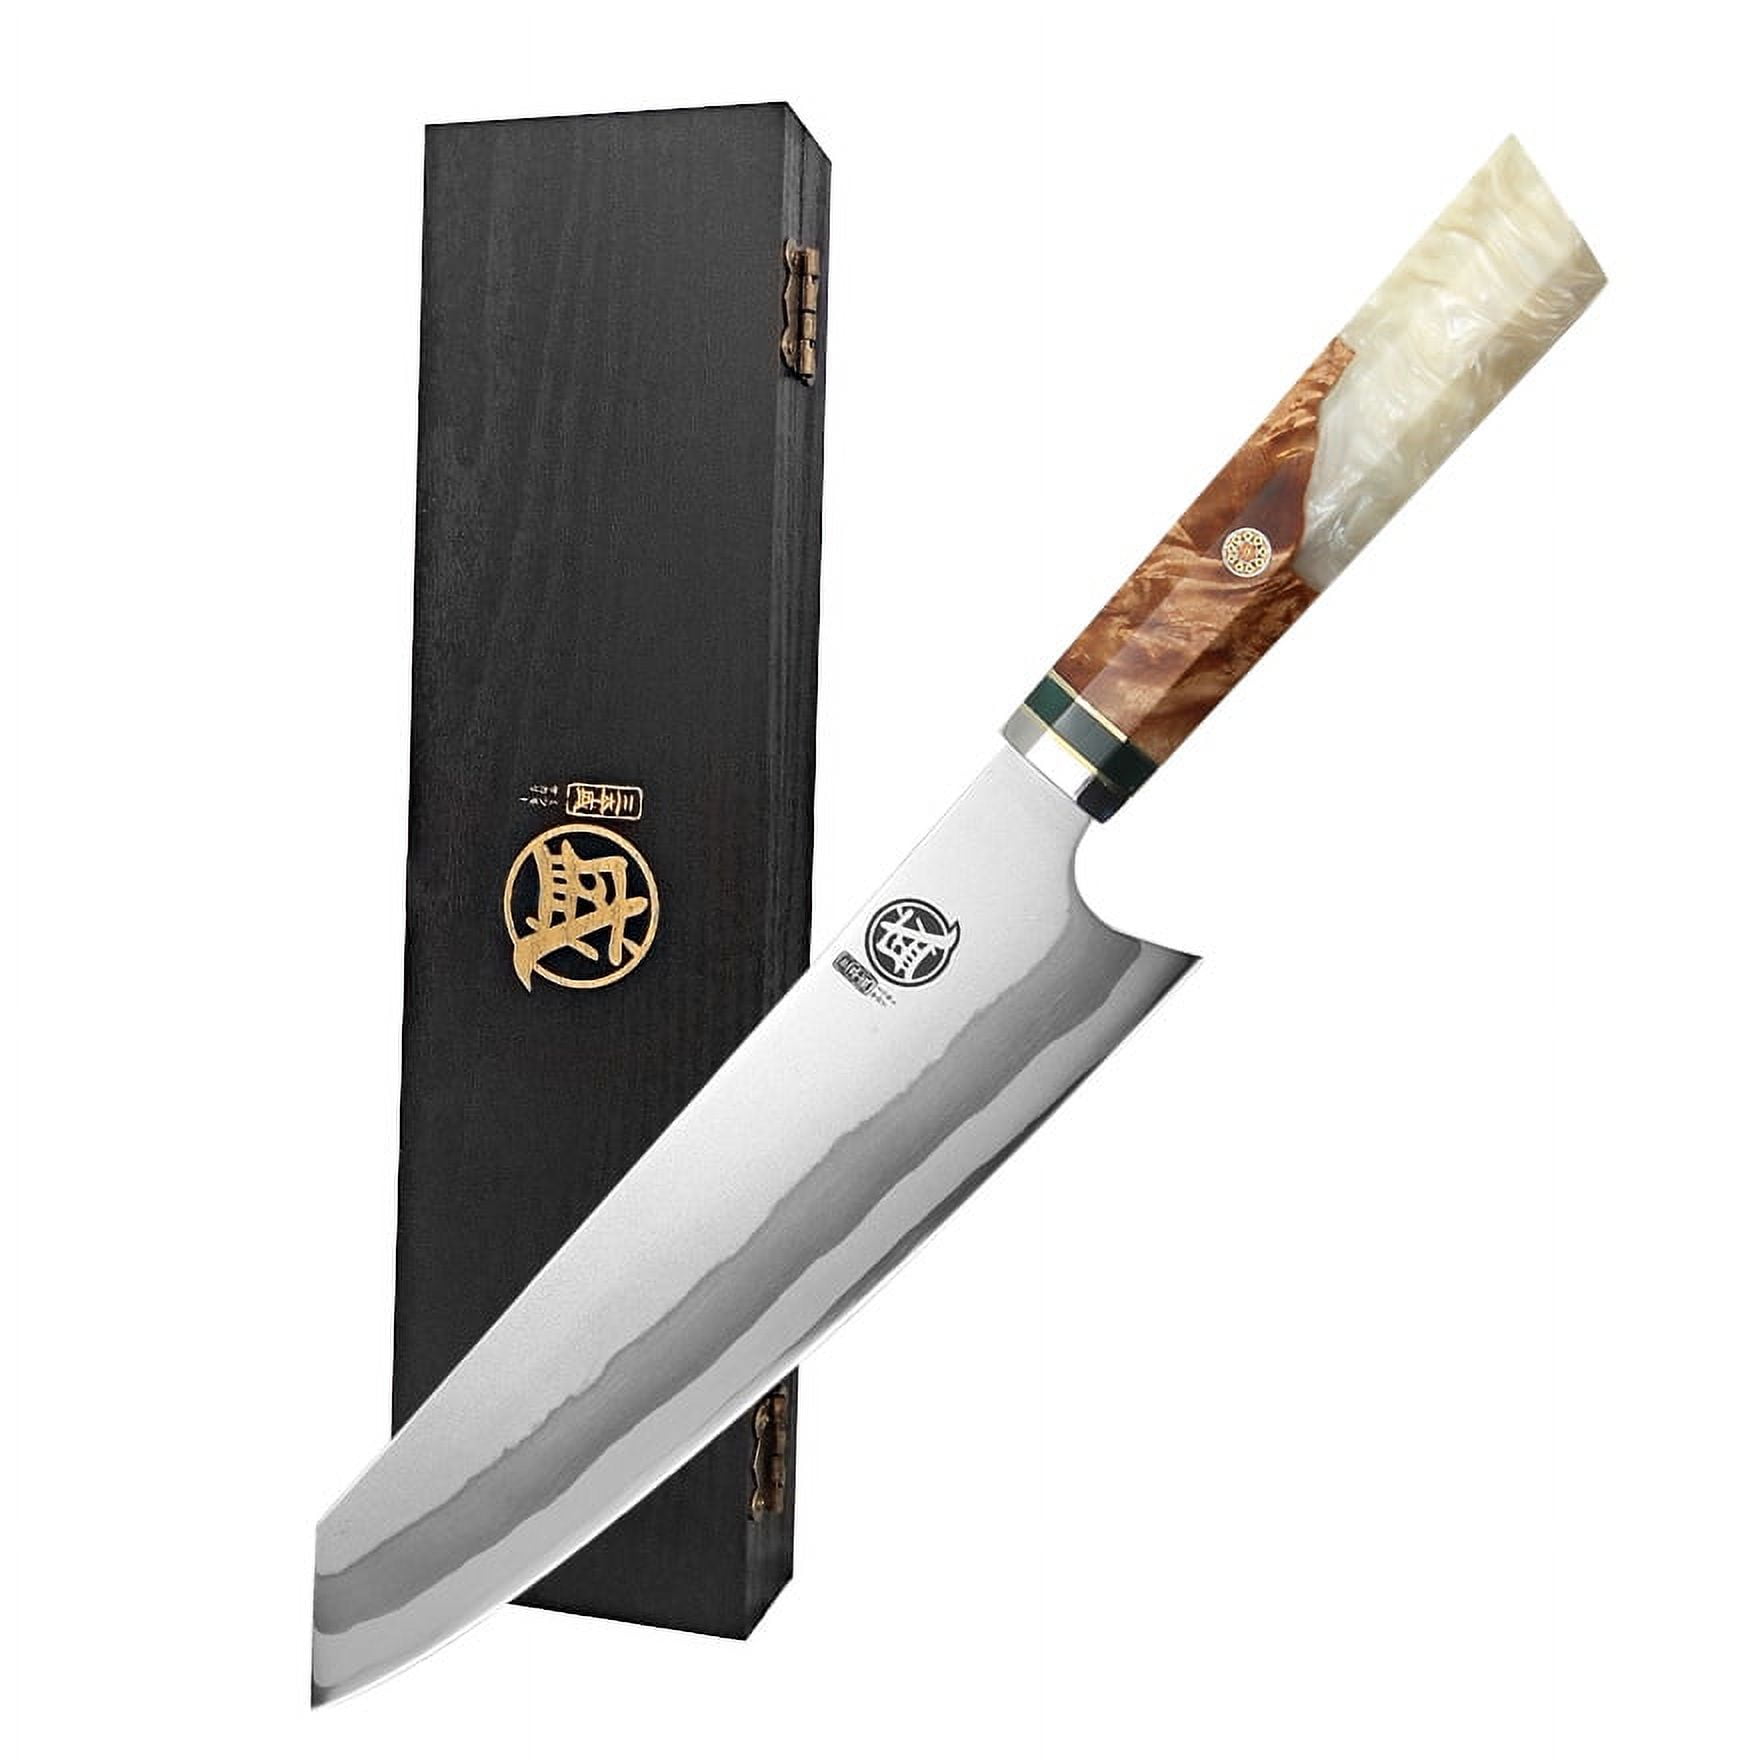 Mago Chef Knife, 8 inch Pro Kitchen Slice Knife, Gift Box Included